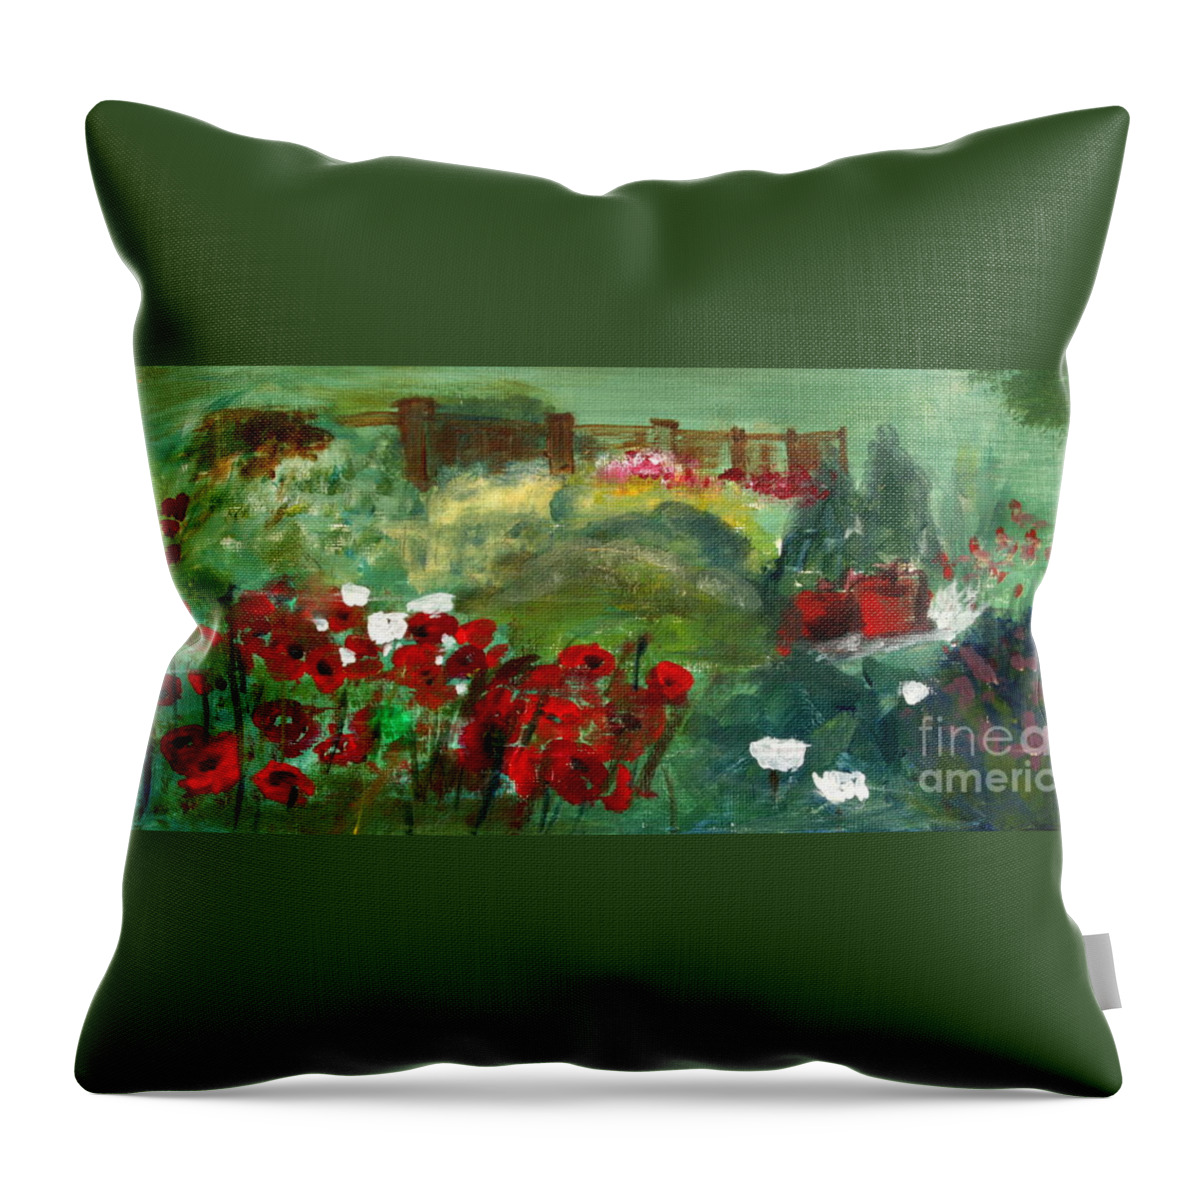 Paintings Throw Pillow featuring the painting Garden View by Julie Lueders 